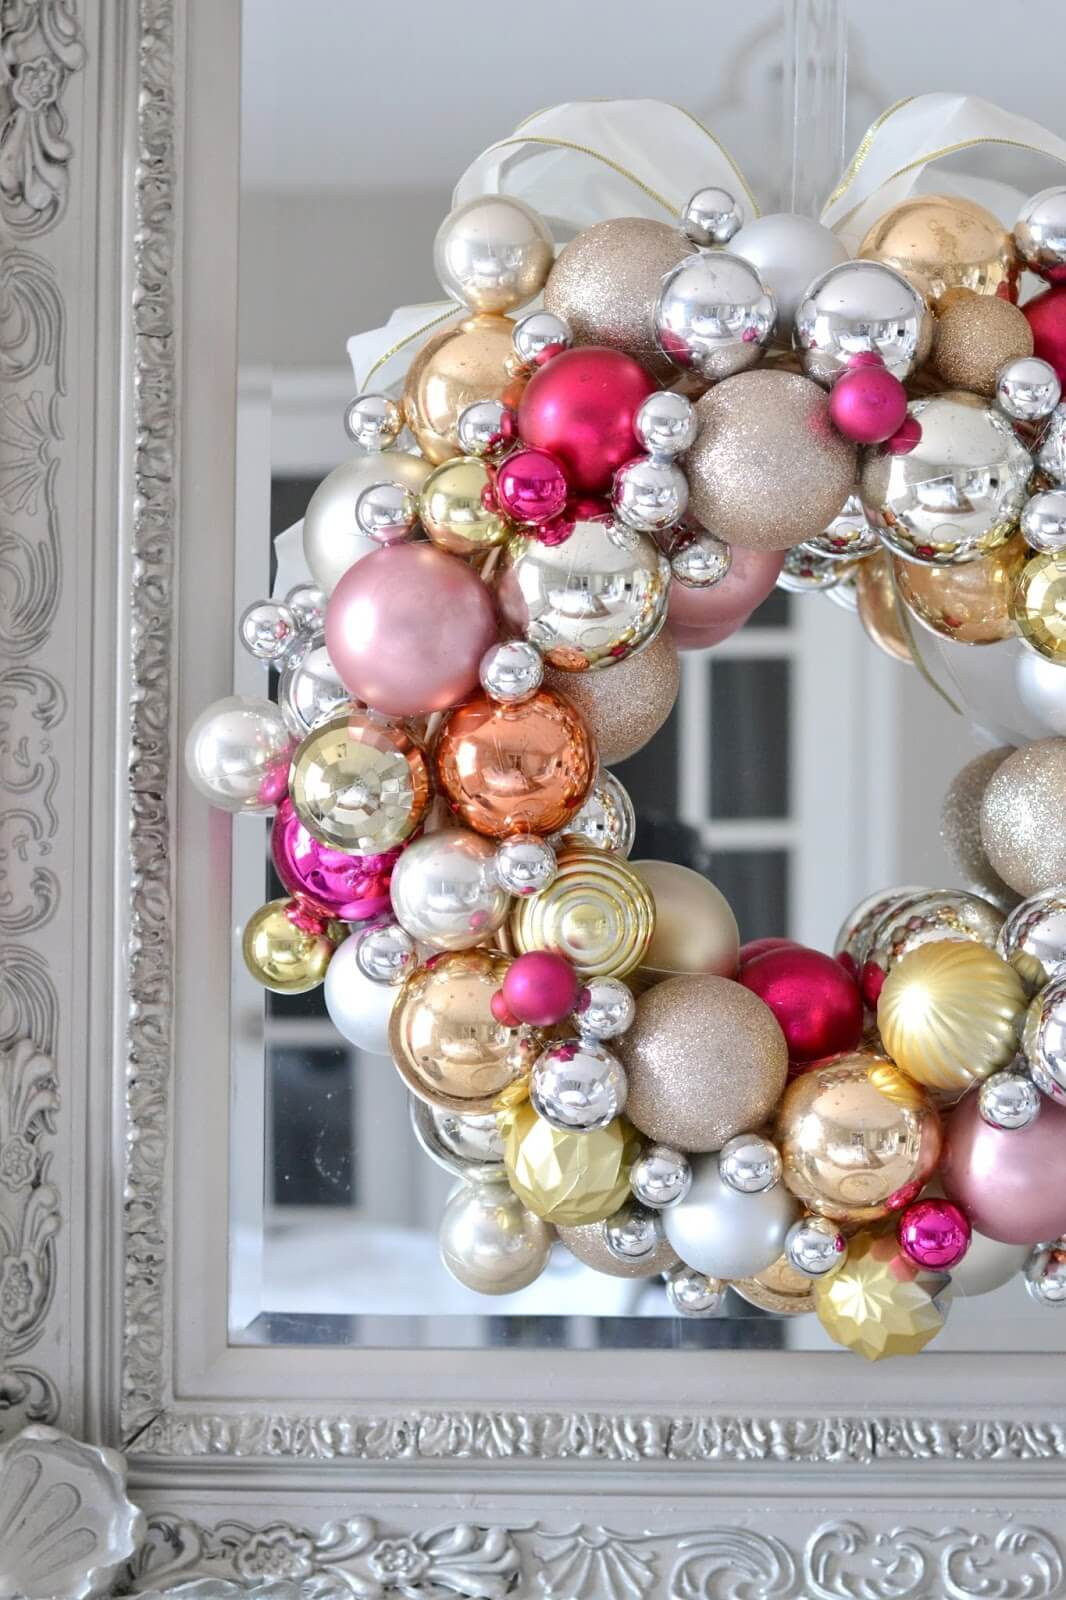 DIY Christmas Ornament Wreath
 10 Ways to Repurpose Christmas Ornaments Dukes and Duchesses